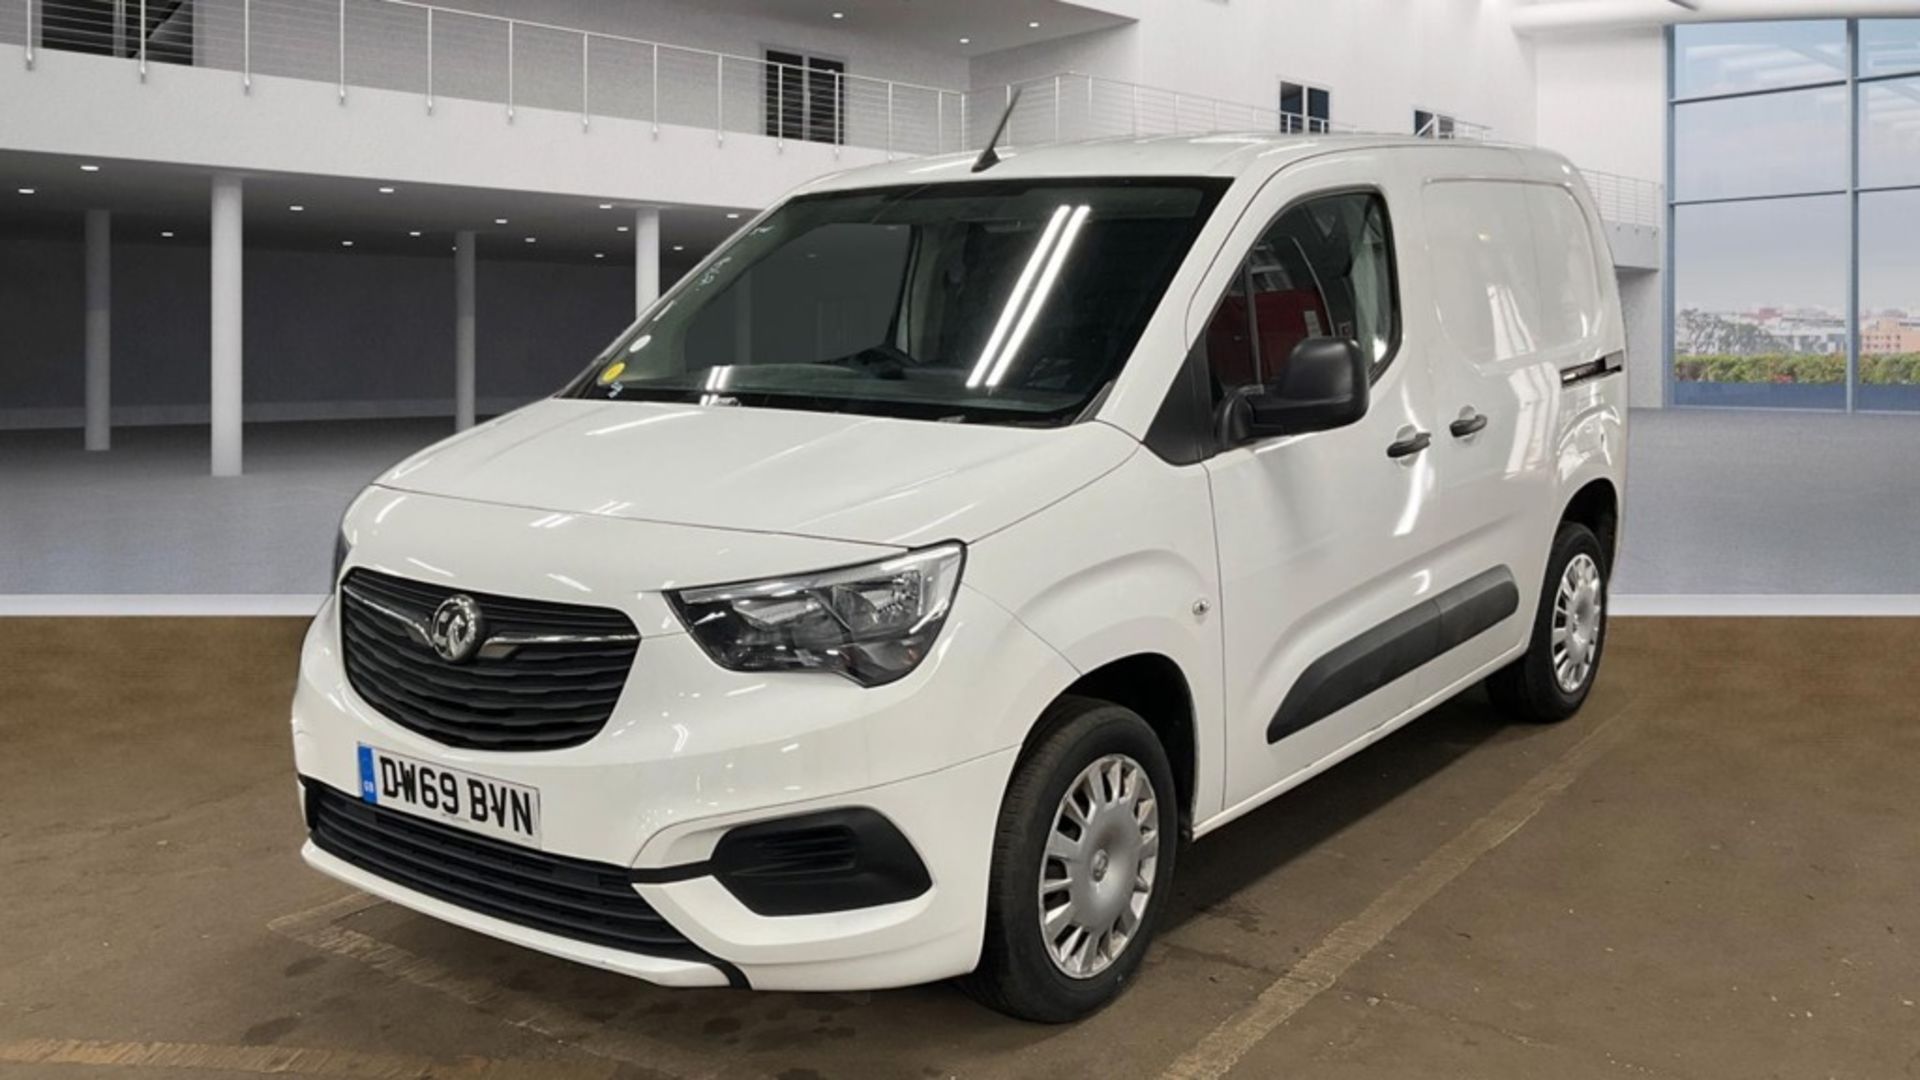 Vauxhall Combo 1.5 Cdti "Sportive" 2020 Reg - 1 Owner - Air Con , Mileage Is Only 79k Miles With FSH - Image 2 of 8